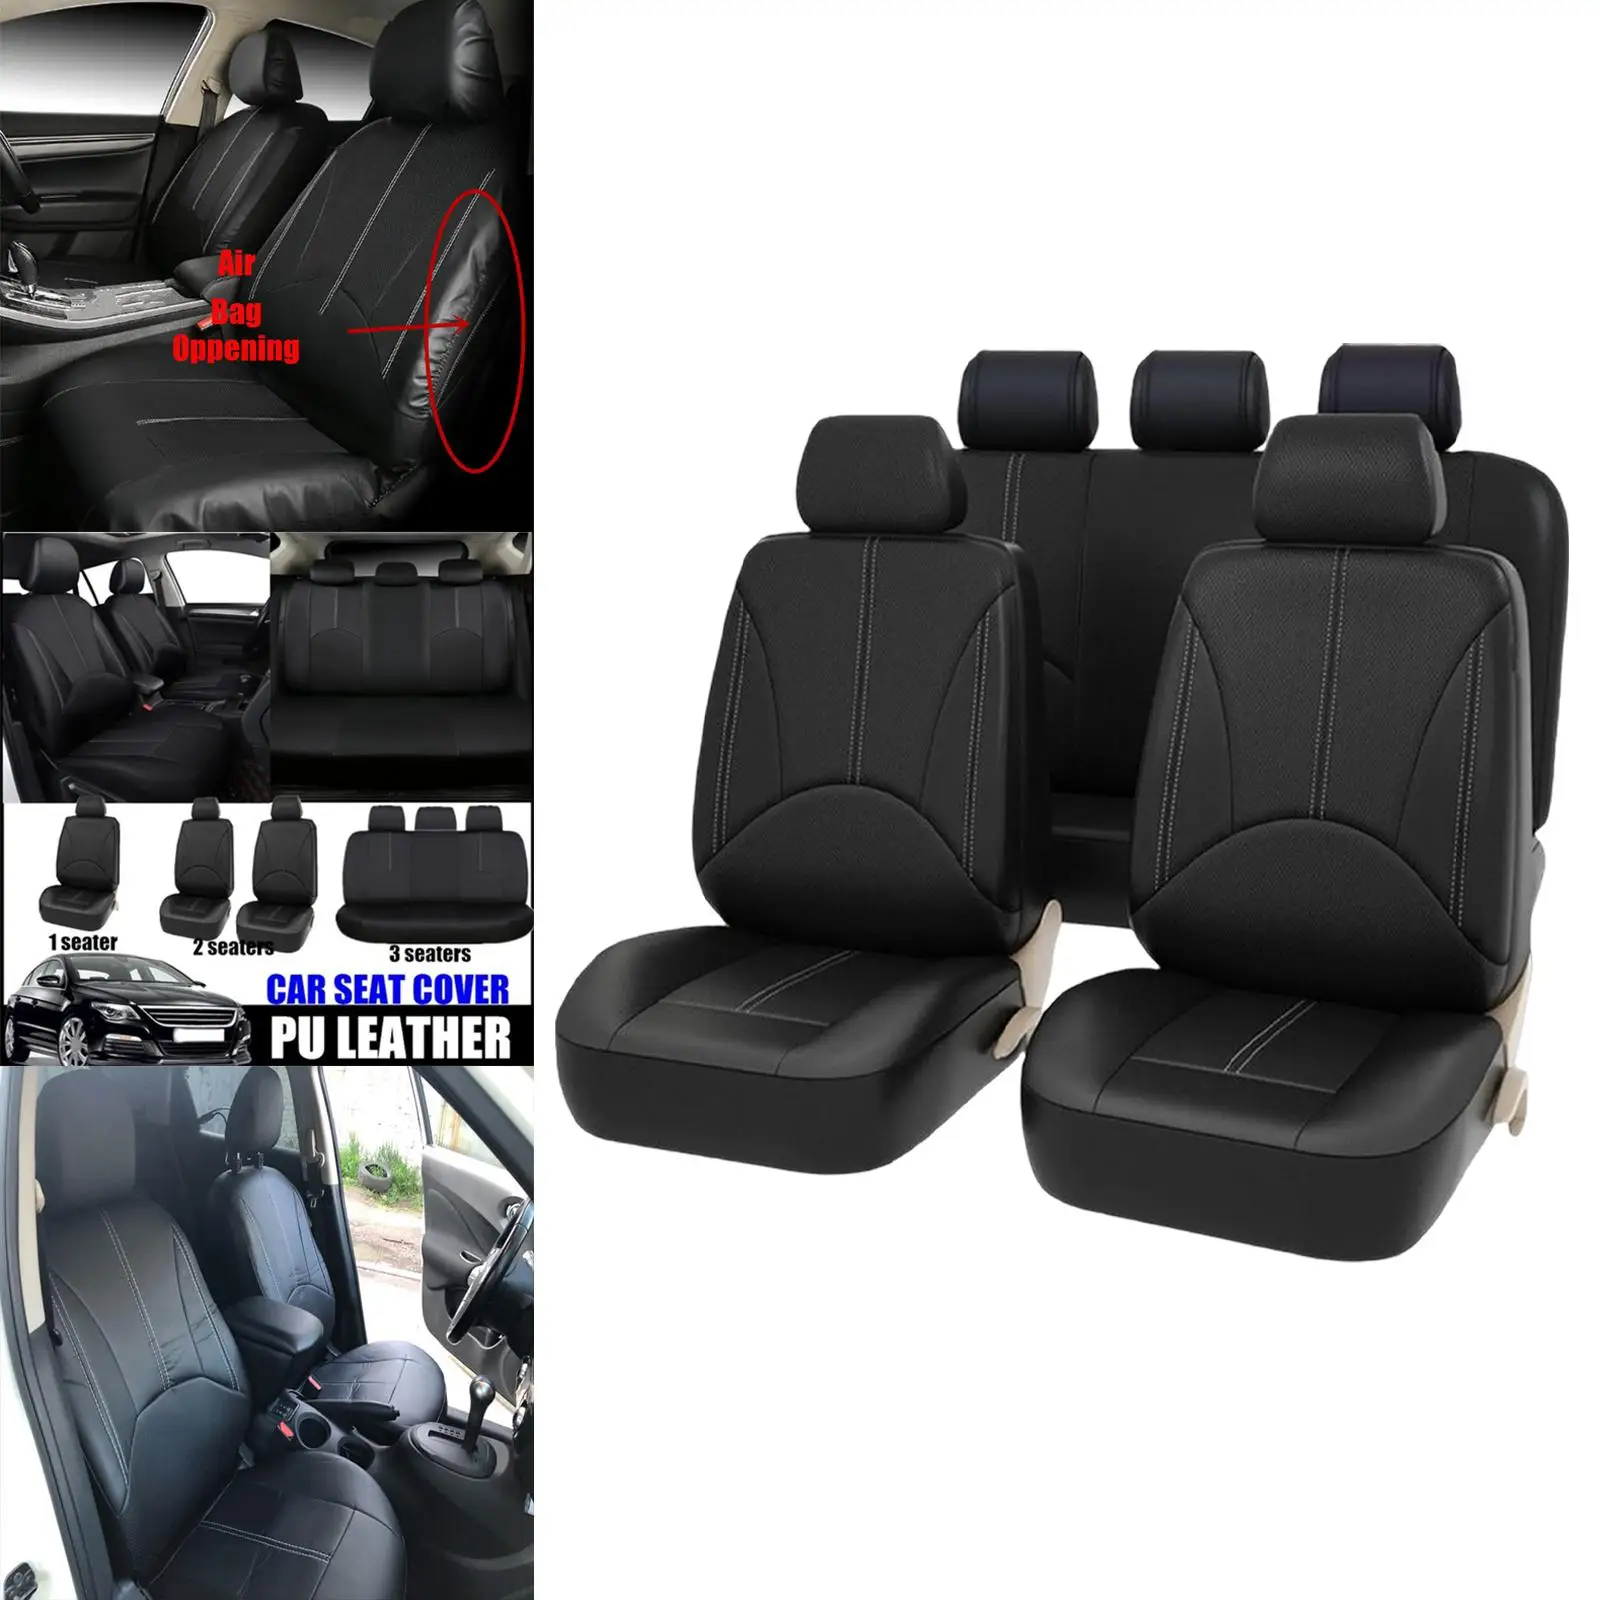 Car Seat Covers Front Rear Seat Headrest Covers Protector for Sedan Auto Parts